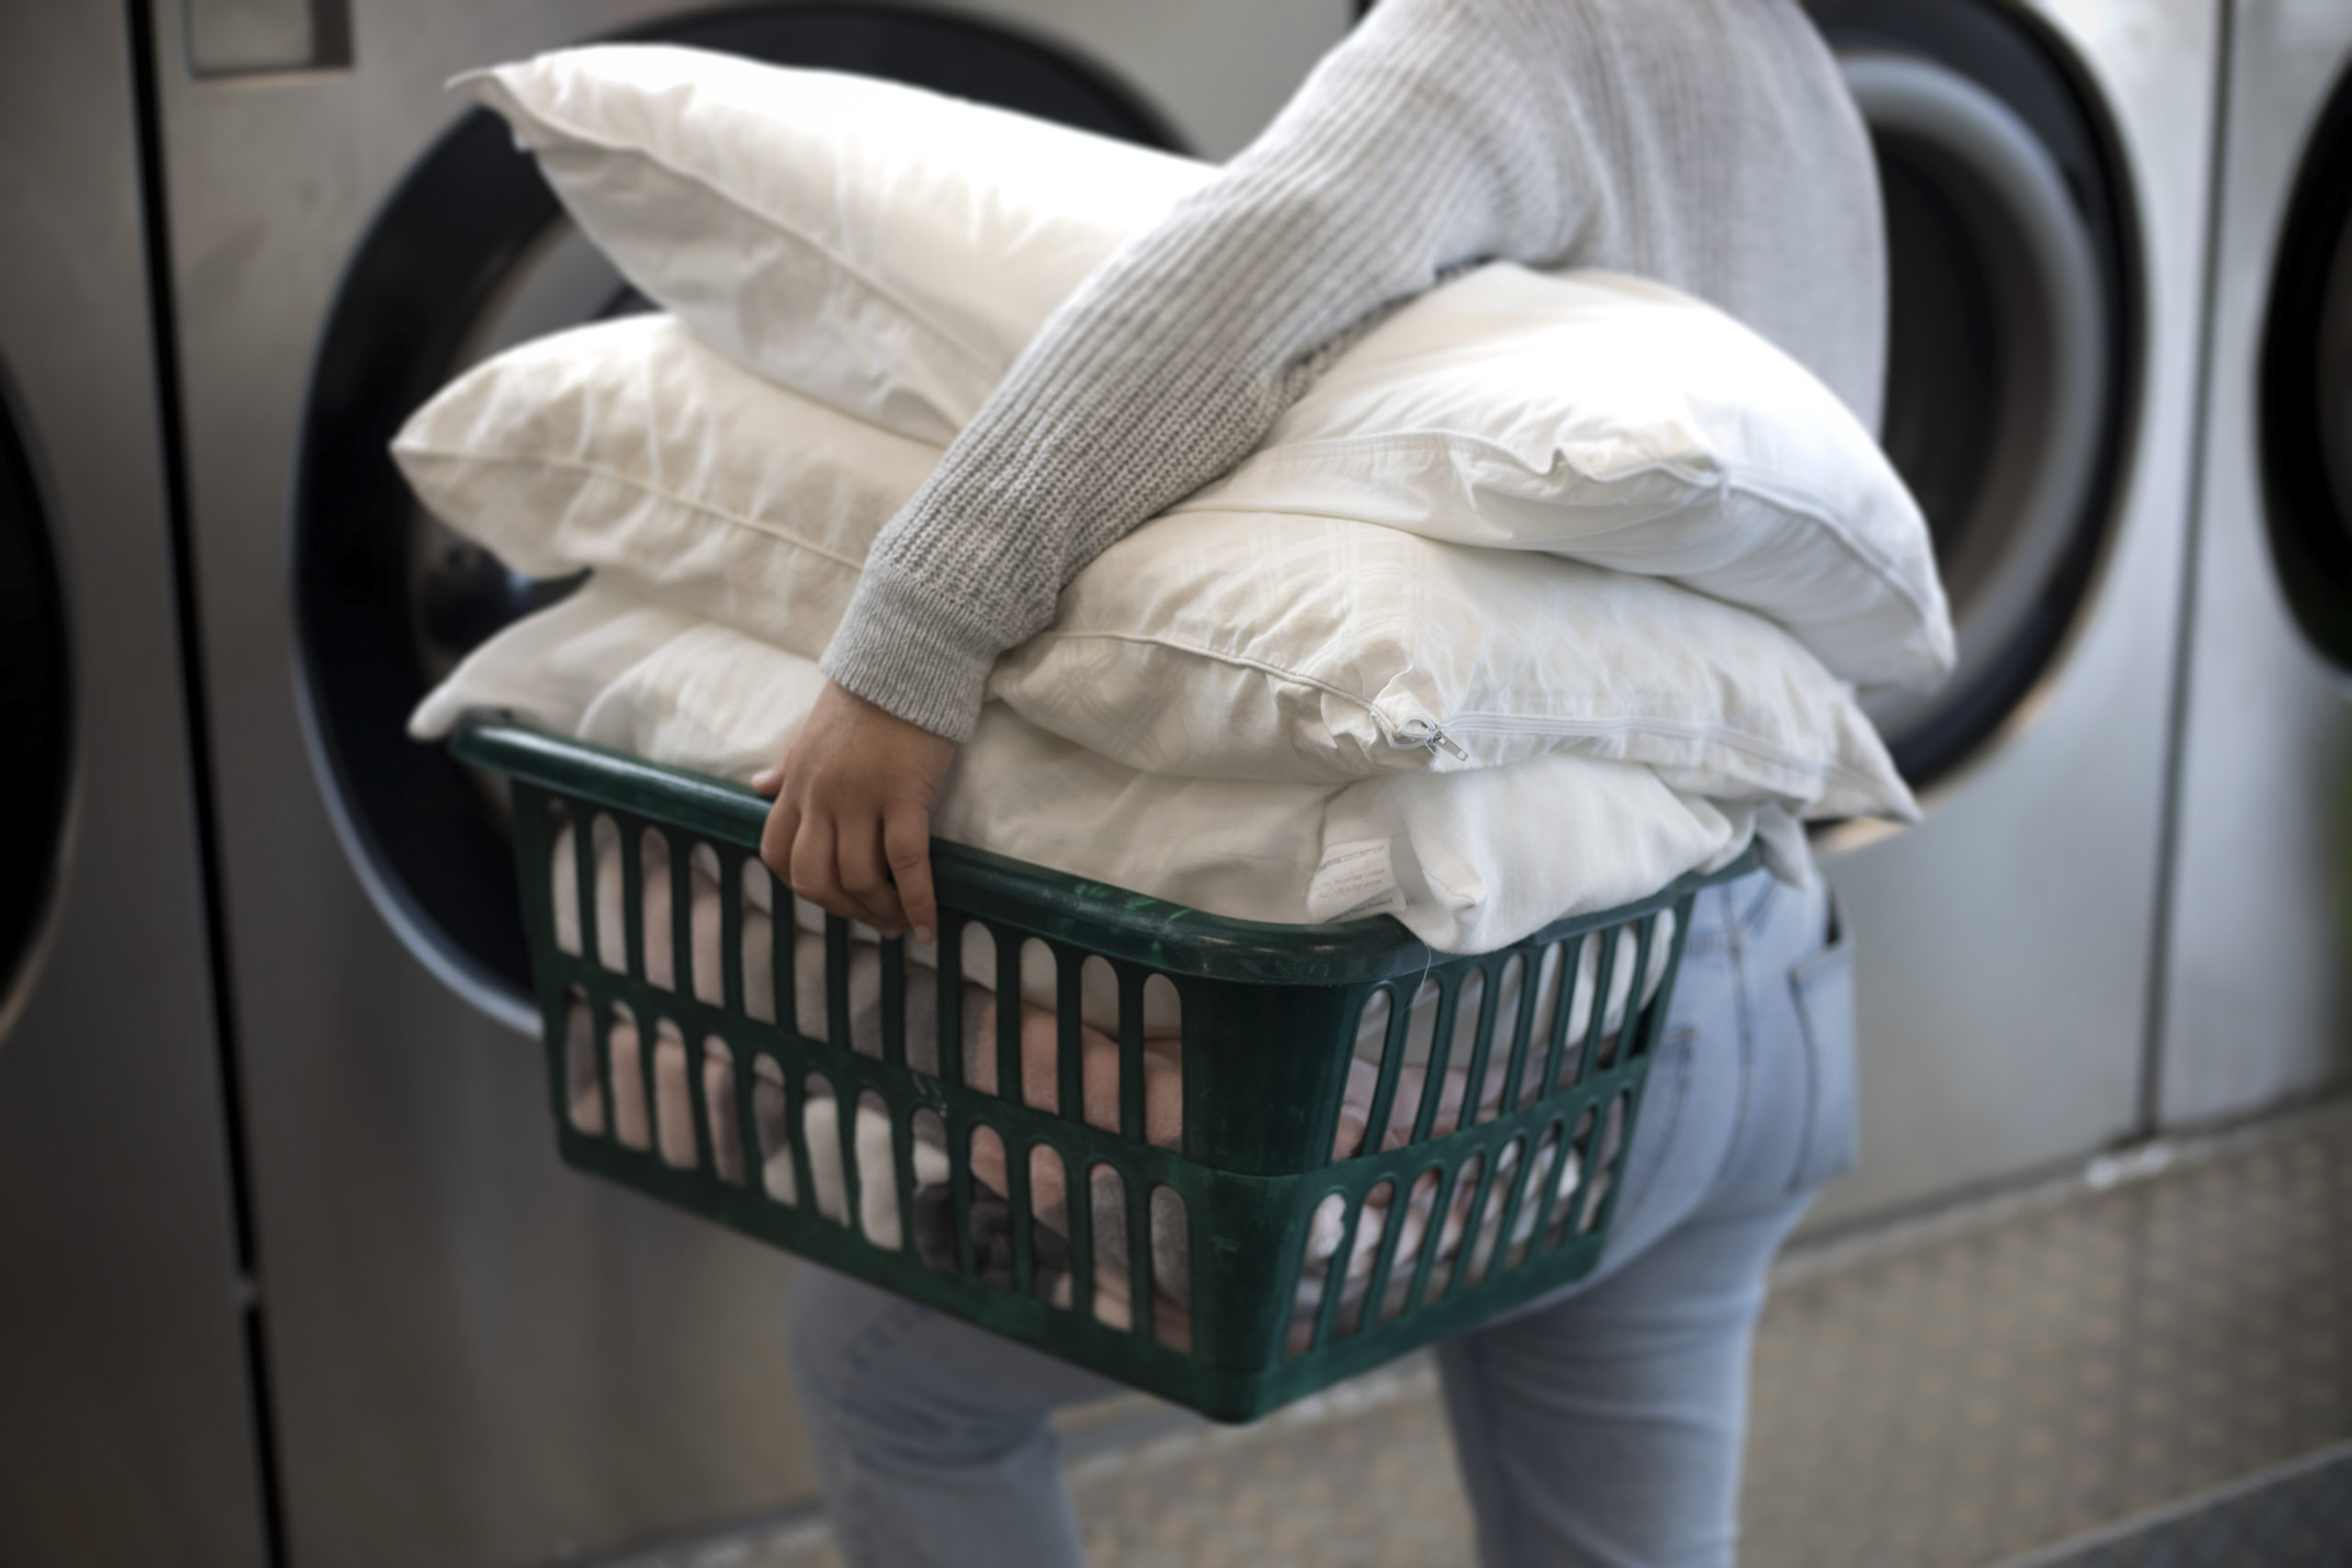 How to Wash Pillows at the Laundromat | Liquid Laundromats